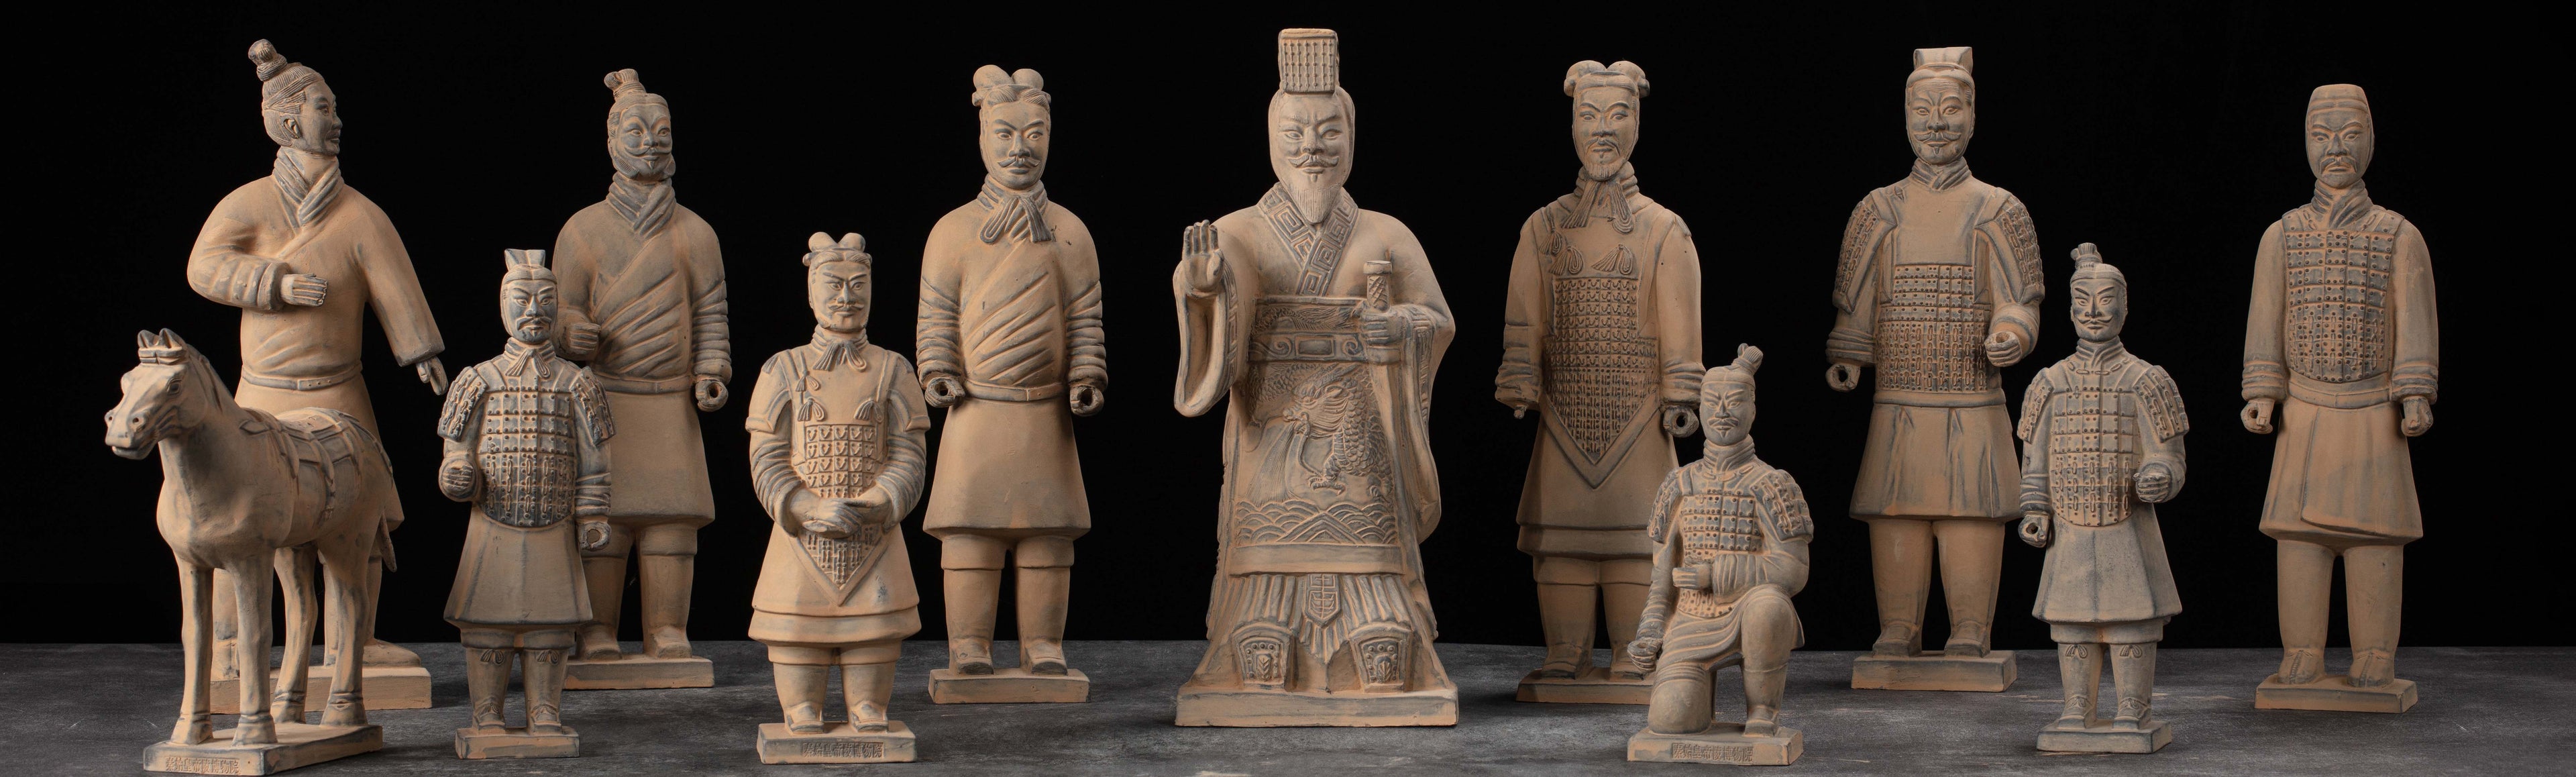 Terracotta army-Clayarmy Blog - Explore Ancient Wonders, Artistry, and Cultural Legacy